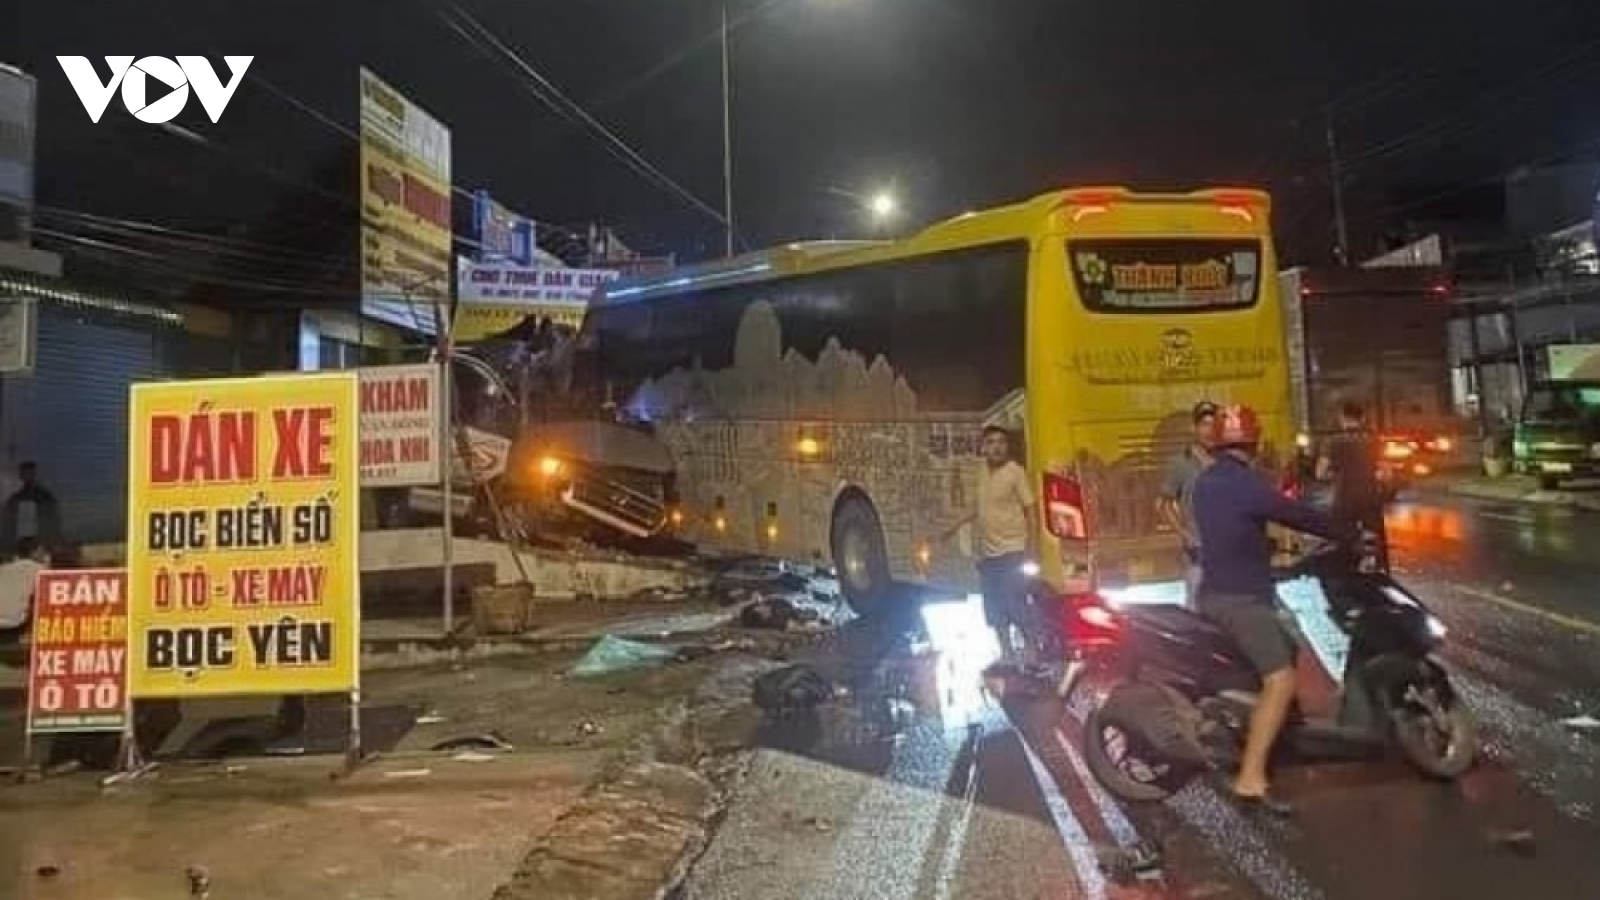 Four killed and five injured in head-on bus collision overnight in Dong Nai